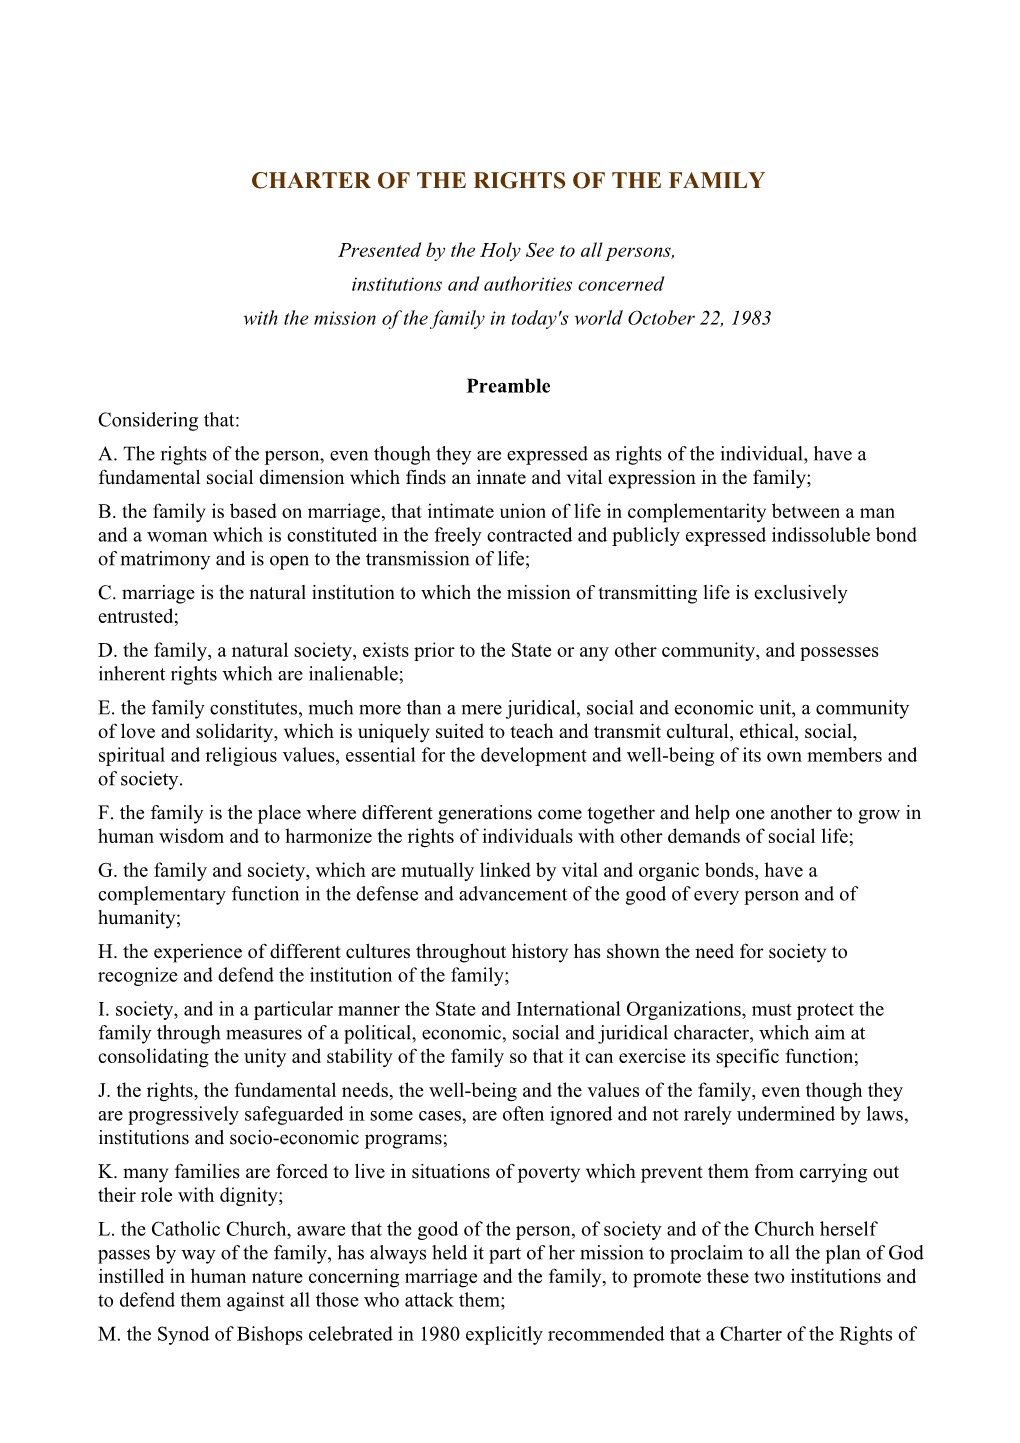 Charter of the Rights of the Family